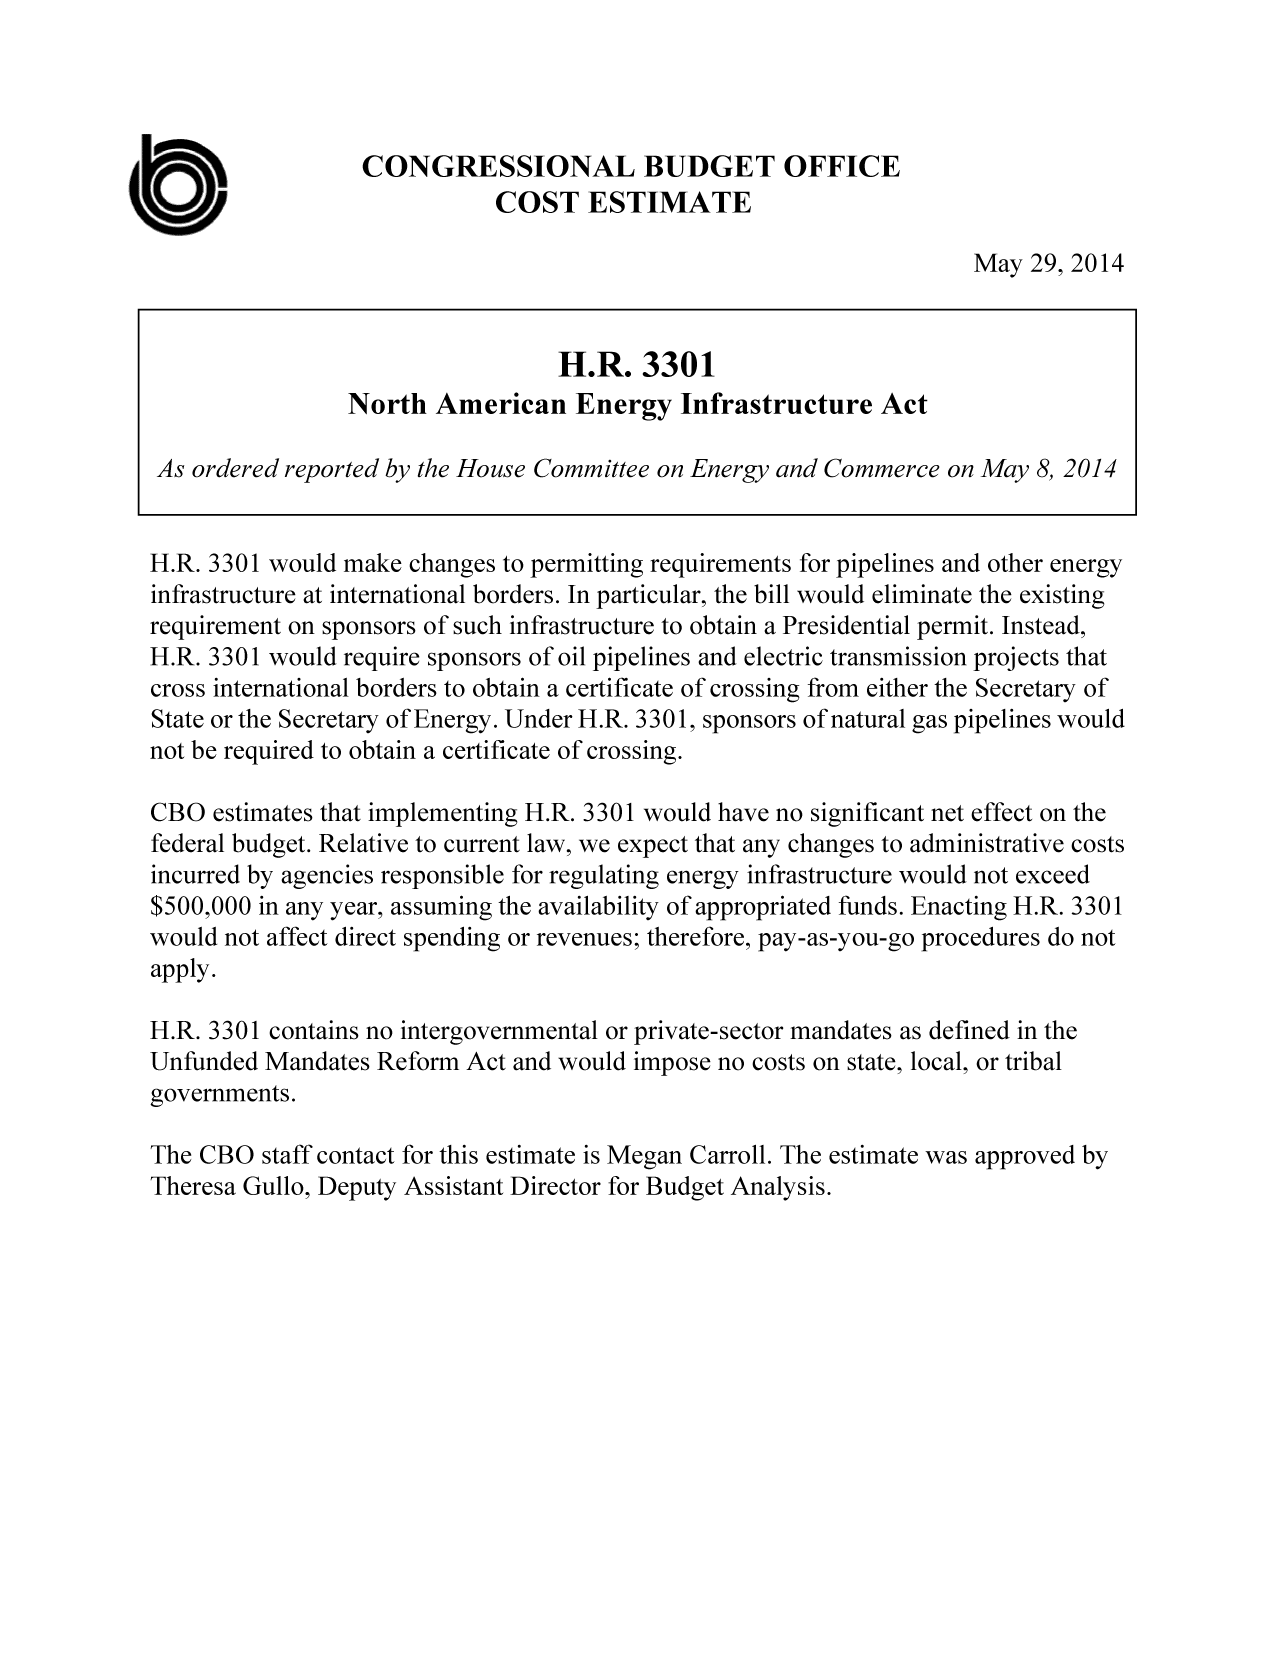 handle is hein.congrec/cbo1645 and id is 1 raw text is: CONGRESSIONAL BUDGET OFFICE
0'                         COST ESTIMATE
May 29, 2014
H.R. 3301
North American Energy Infrastructure Act
As ordered reported by the House Committee on Energy and Commerce on May 8, 2014
H.R. 3301 would make changes to permitting requirements for pipelines and other energy
infrastructure at international borders. In particular, the bill would eliminate the existing
requirement on sponsors of such infrastructure to obtain a Presidential permit. Instead,
H.R. 3301 would require sponsors of oil pipelines and electric transmission projects that
cross international borders to obtain a certificate of crossing from either the Secretary of
State or the Secretary of Energy. Under H.R. 3301, sponsors of natural gas pipelines would
not be required to obtain a certificate of crossing.
CBO estimates that implementing H.R. 3301 would have no significant net effect on the
federal budget. Relative to current law, we expect that any changes to administrative costs
incurred by agencies responsible for regulating energy infrastructure would not exceed
$500,000 in any year, assuming the availability of appropriated funds. Enacting H.R. 3301
would not affect direct spending or revenues; therefore, pay-as-you-go procedures do not
apply.
H.R. 3301 contains no intergovernmental or private-sector mandates as defined in the
Unfunded Mandates Reform Act and would impose no costs on state, local, or tribal
governments.
The CBO staff contact for this estimate is Megan Carroll. The estimate was approved by
Theresa Gullo, Deputy Assistant Director for Budget Analysis.


